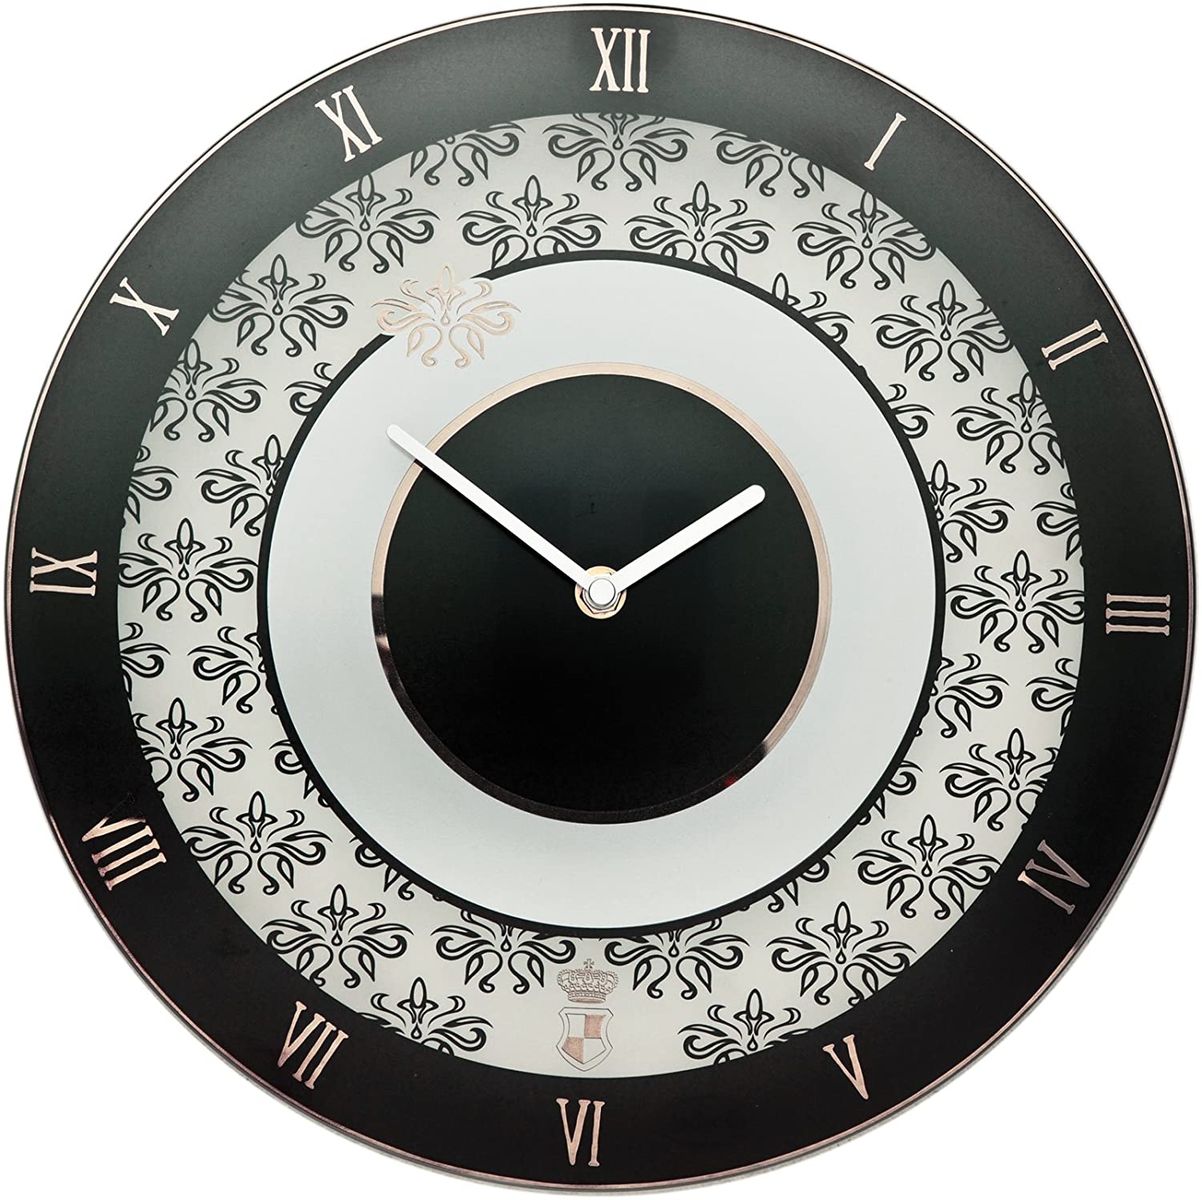 Goebel Château Wall Clock Wall Clock Kitchen Clock Decoration, Glass – Black and White Floral 27050221